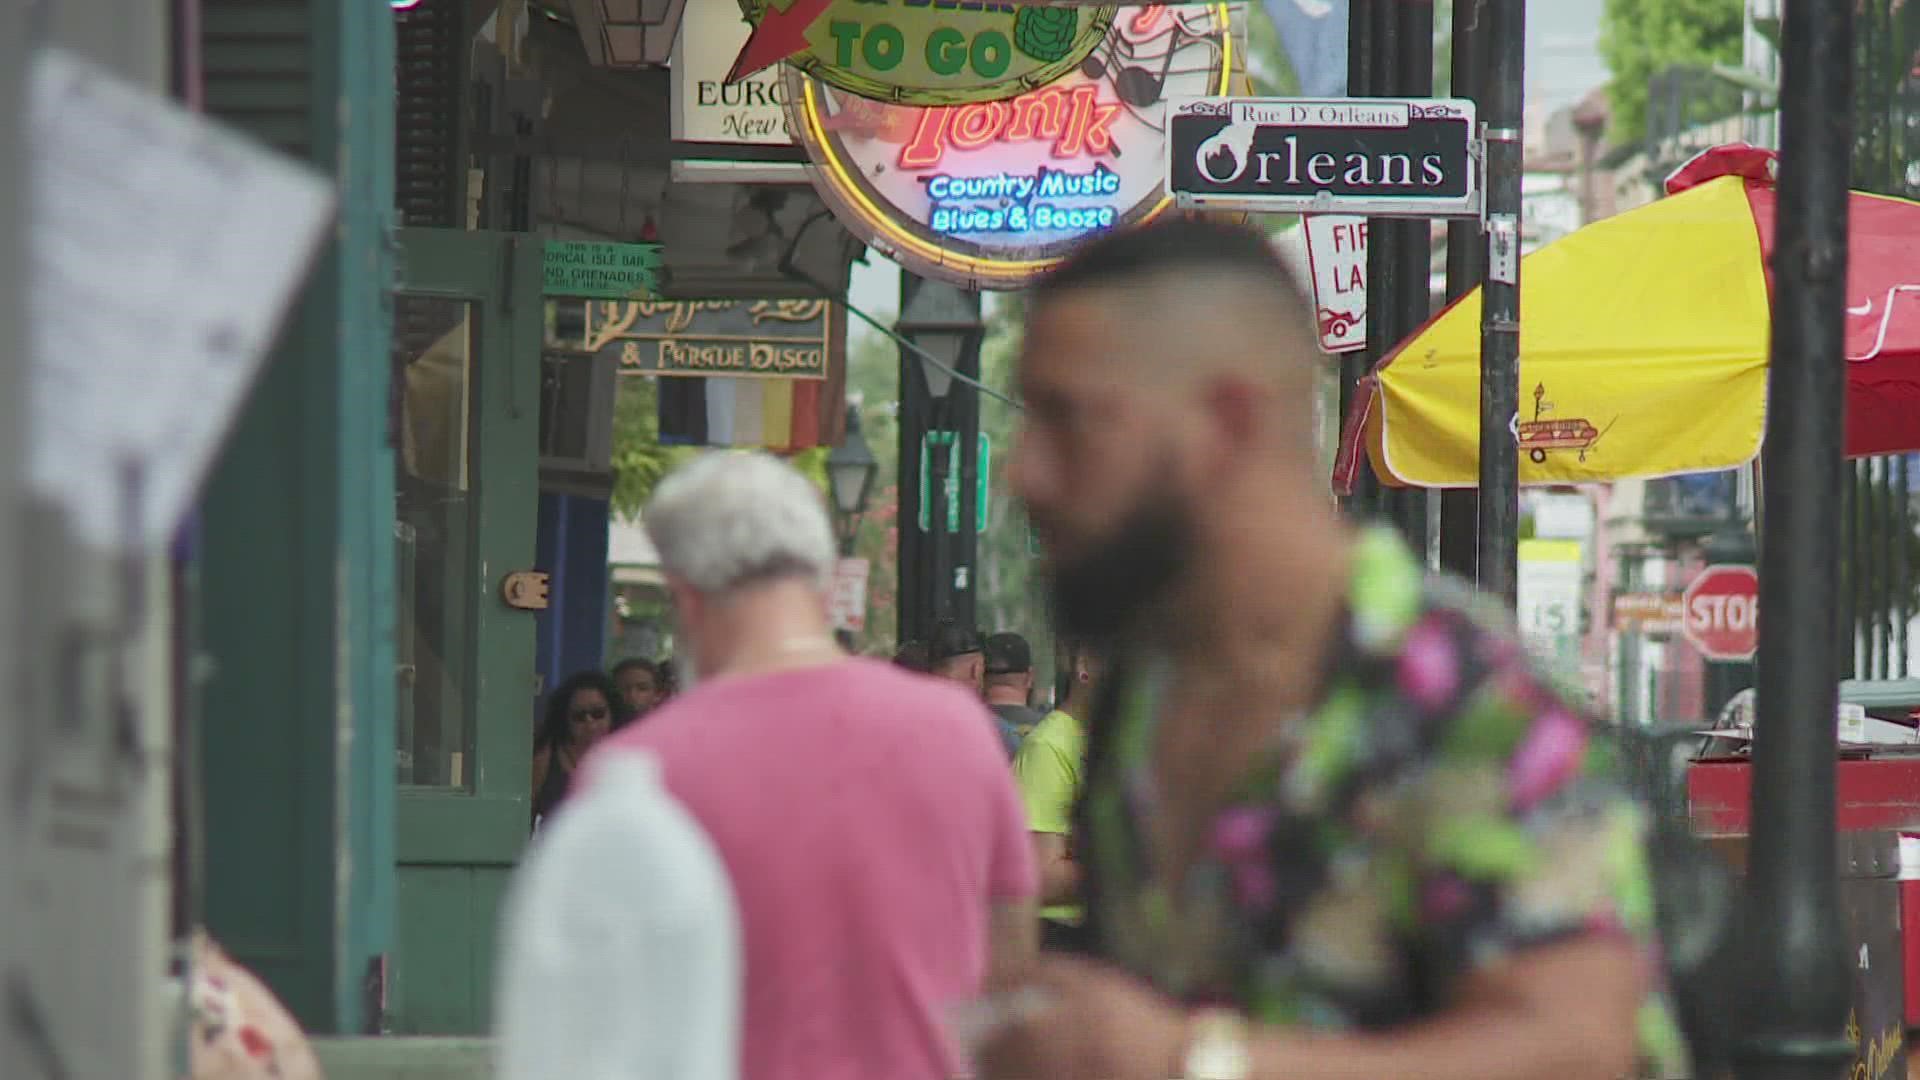 Crime in the French Quarter has risen, leaving residents furious.